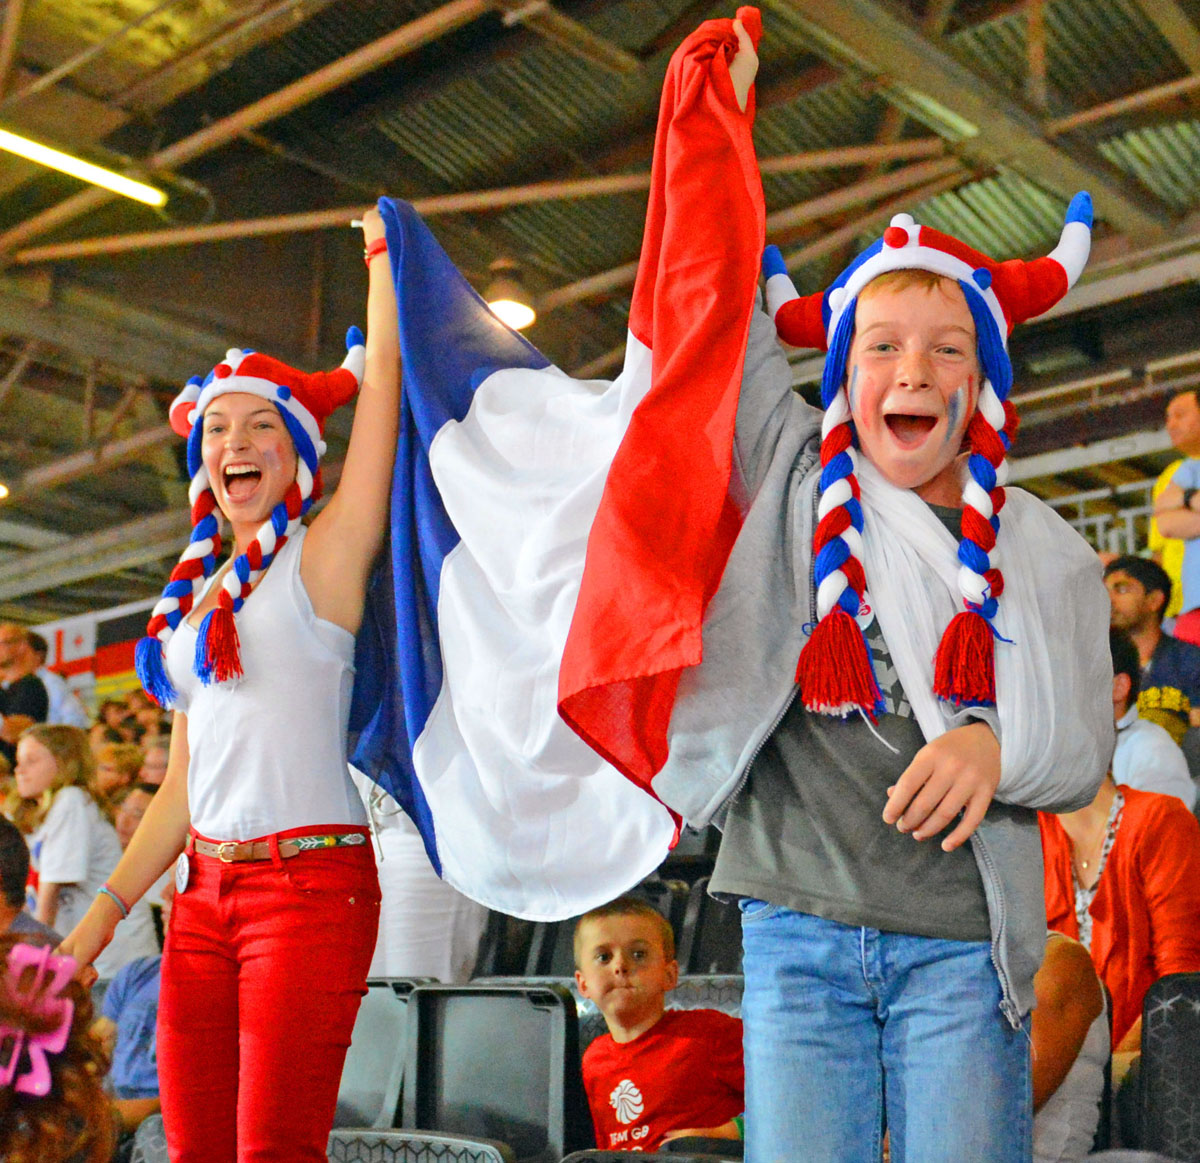 Avid fans, Lora and David Burgun, from Strasburg France, celebrate Lucie Decosse's gold medal victory in the women's Judo Finals in the London Olympics.(AP Photo/Dick Druckman)